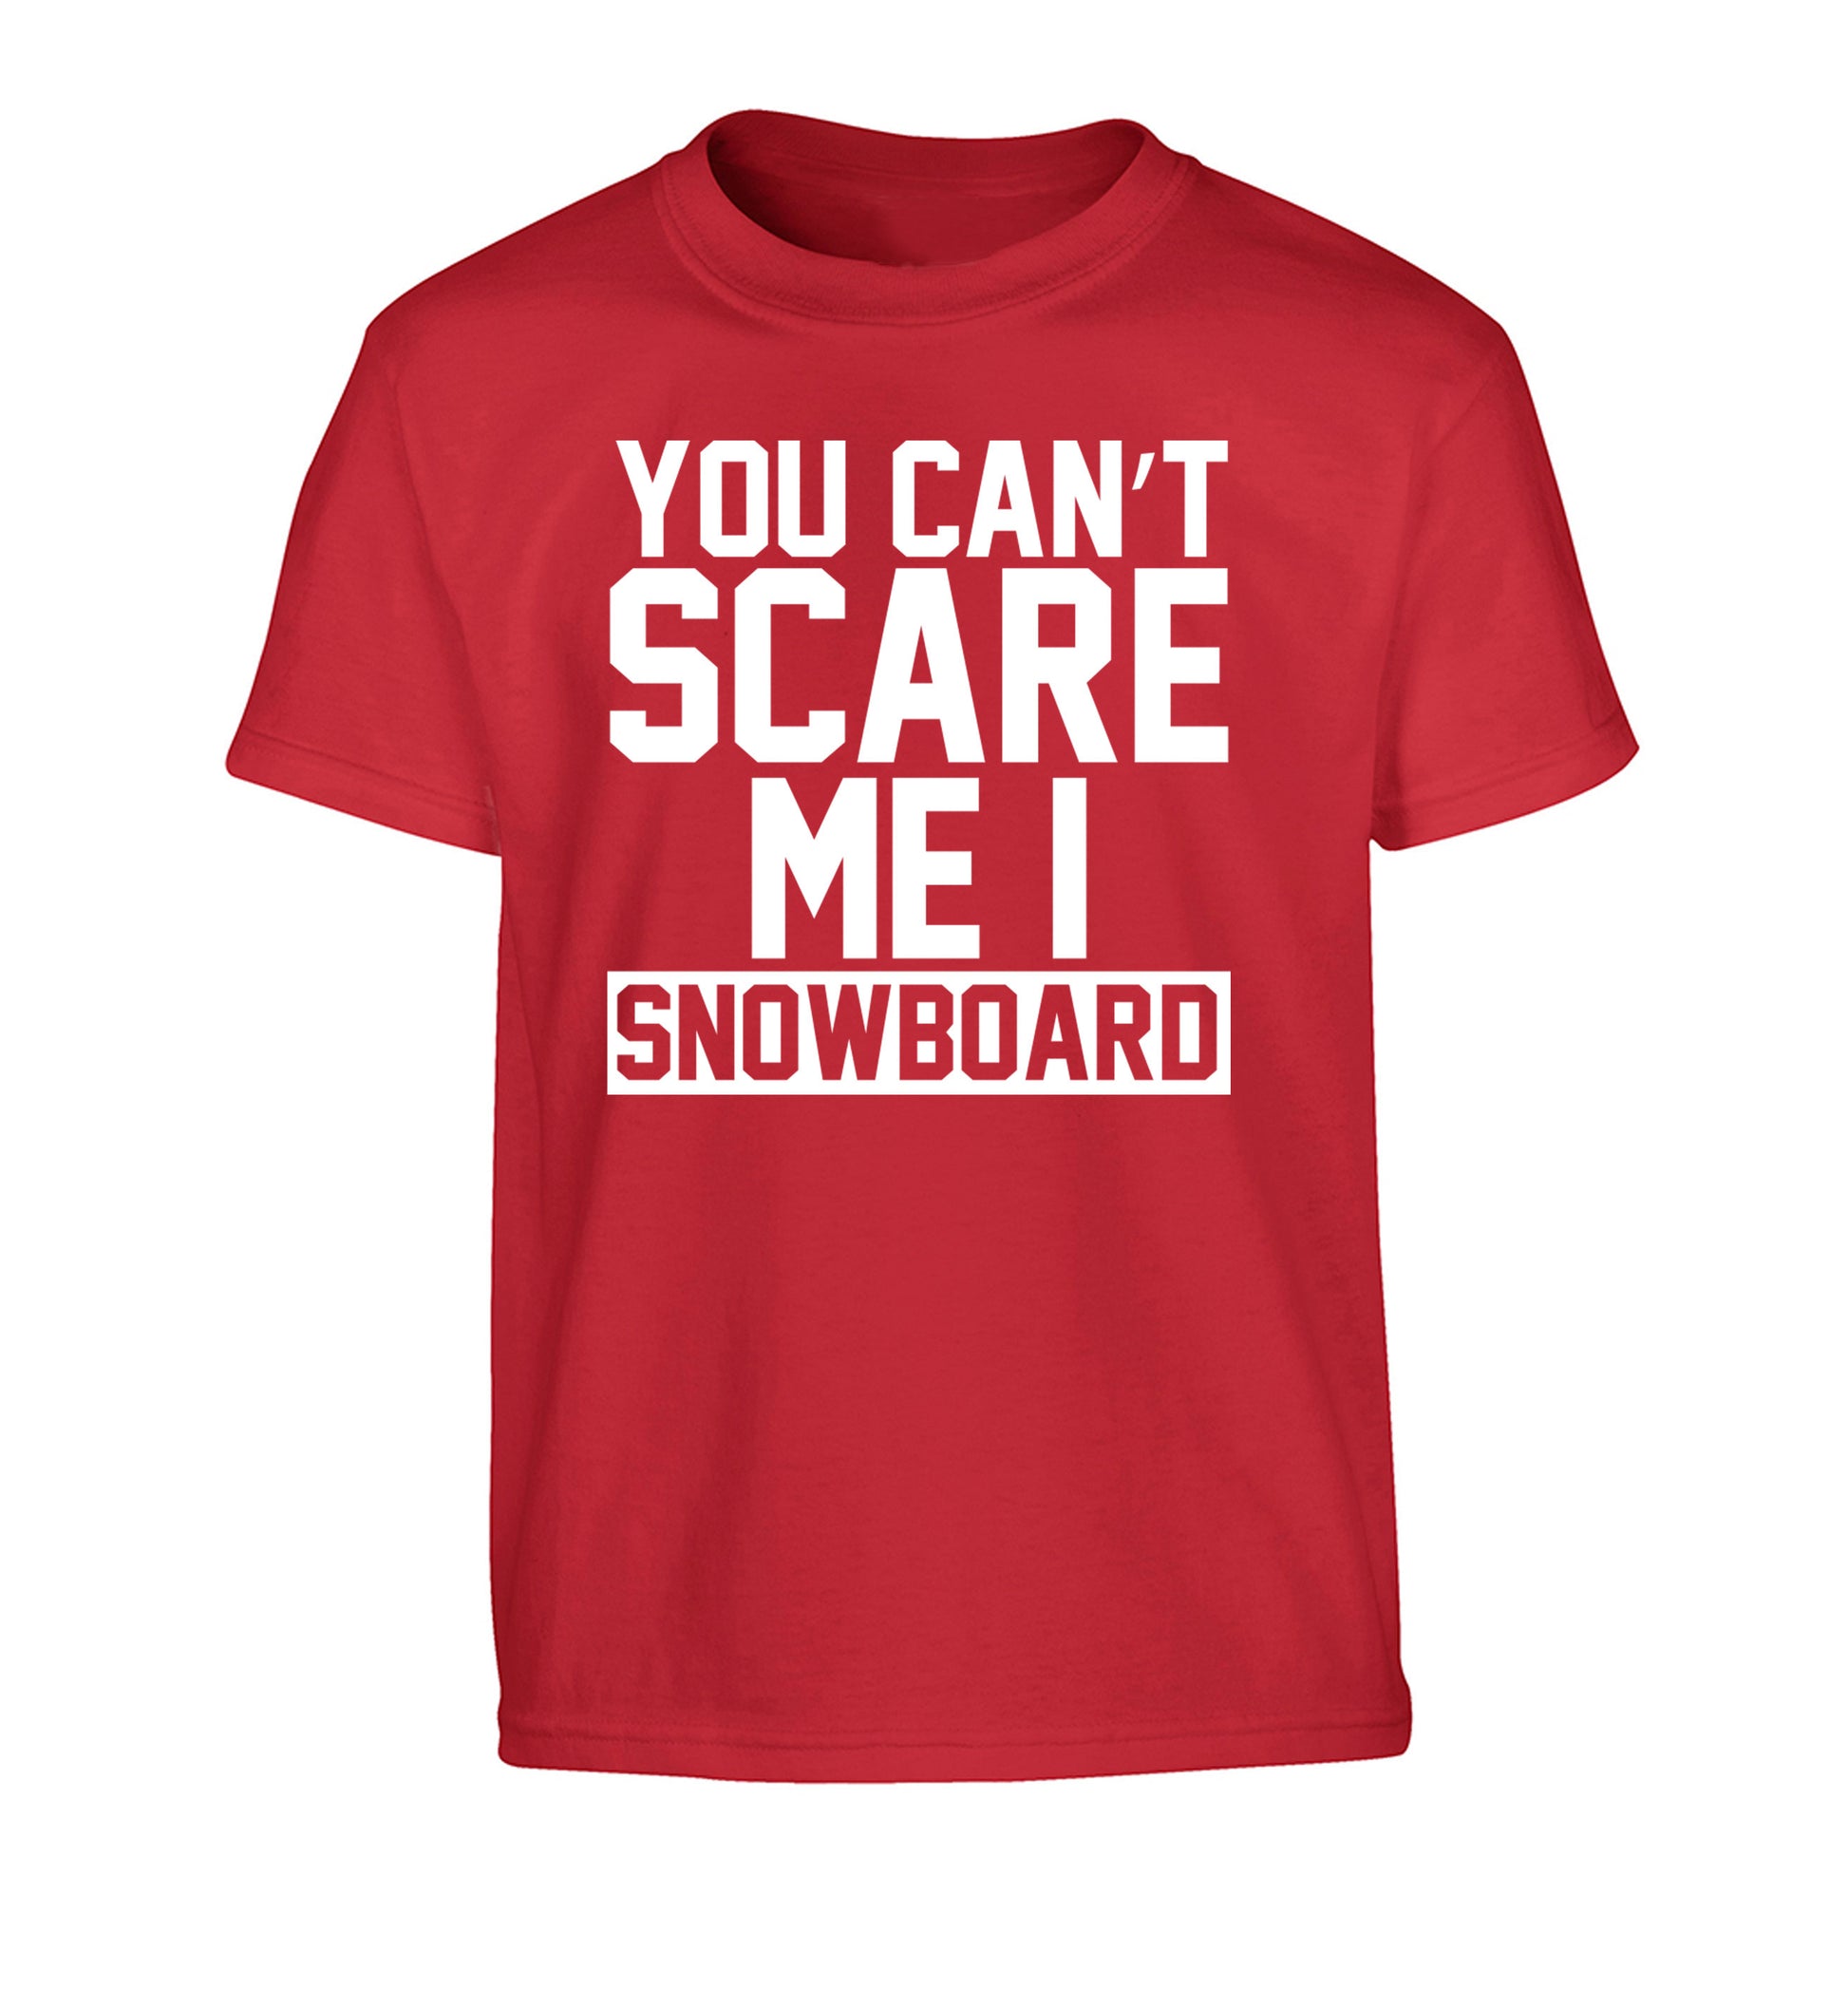 You can't scare me I snowboard Children's red Tshirt 12-14 Years